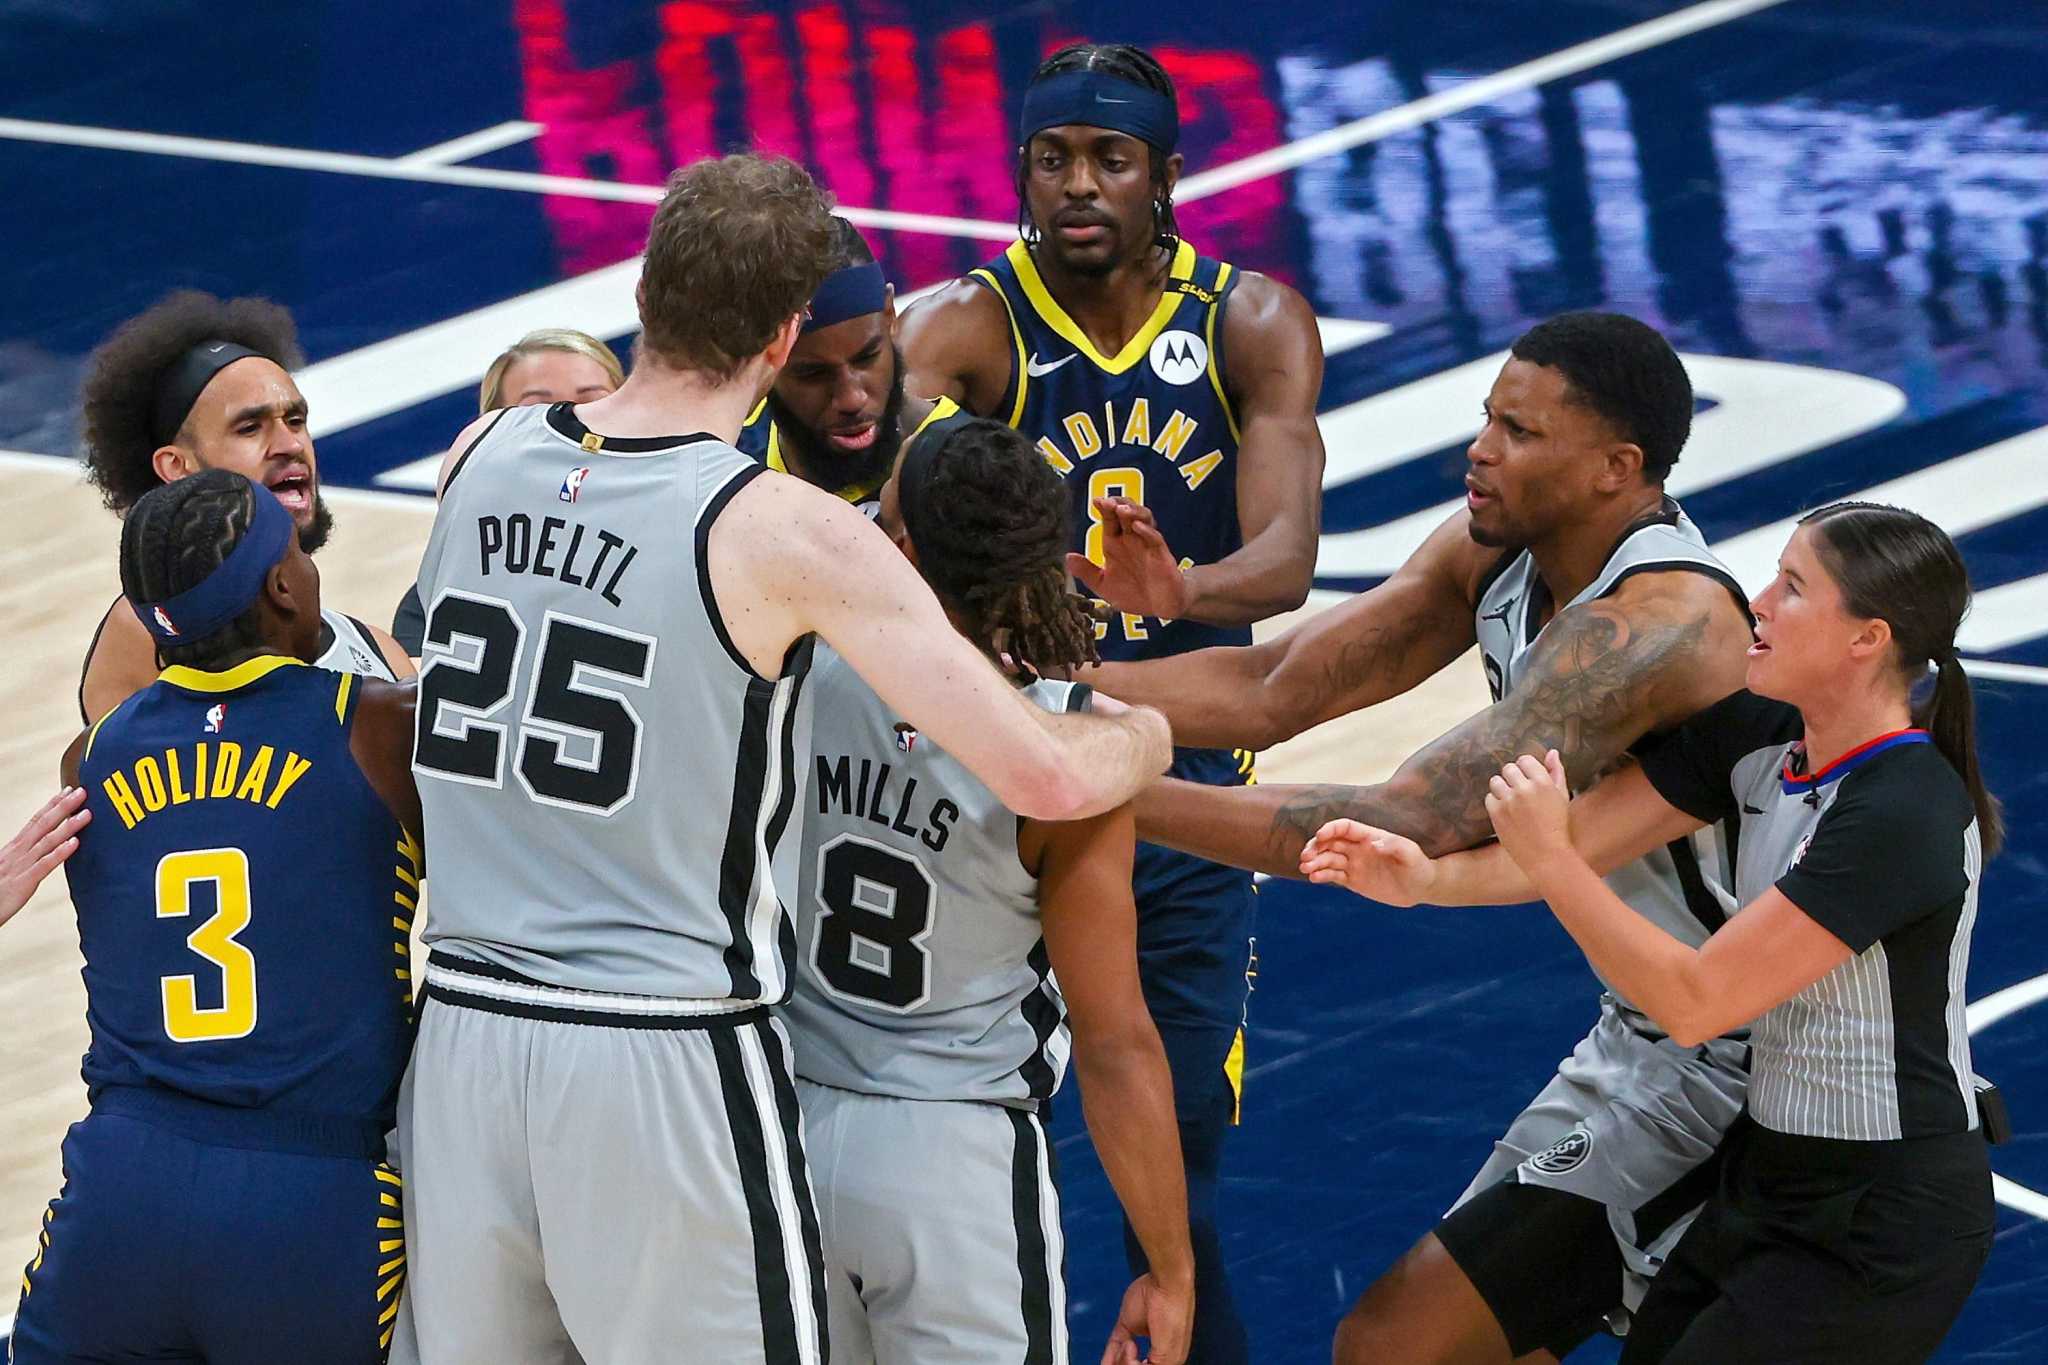 Patty Mills scores 31 to lead Spurs past Warriors